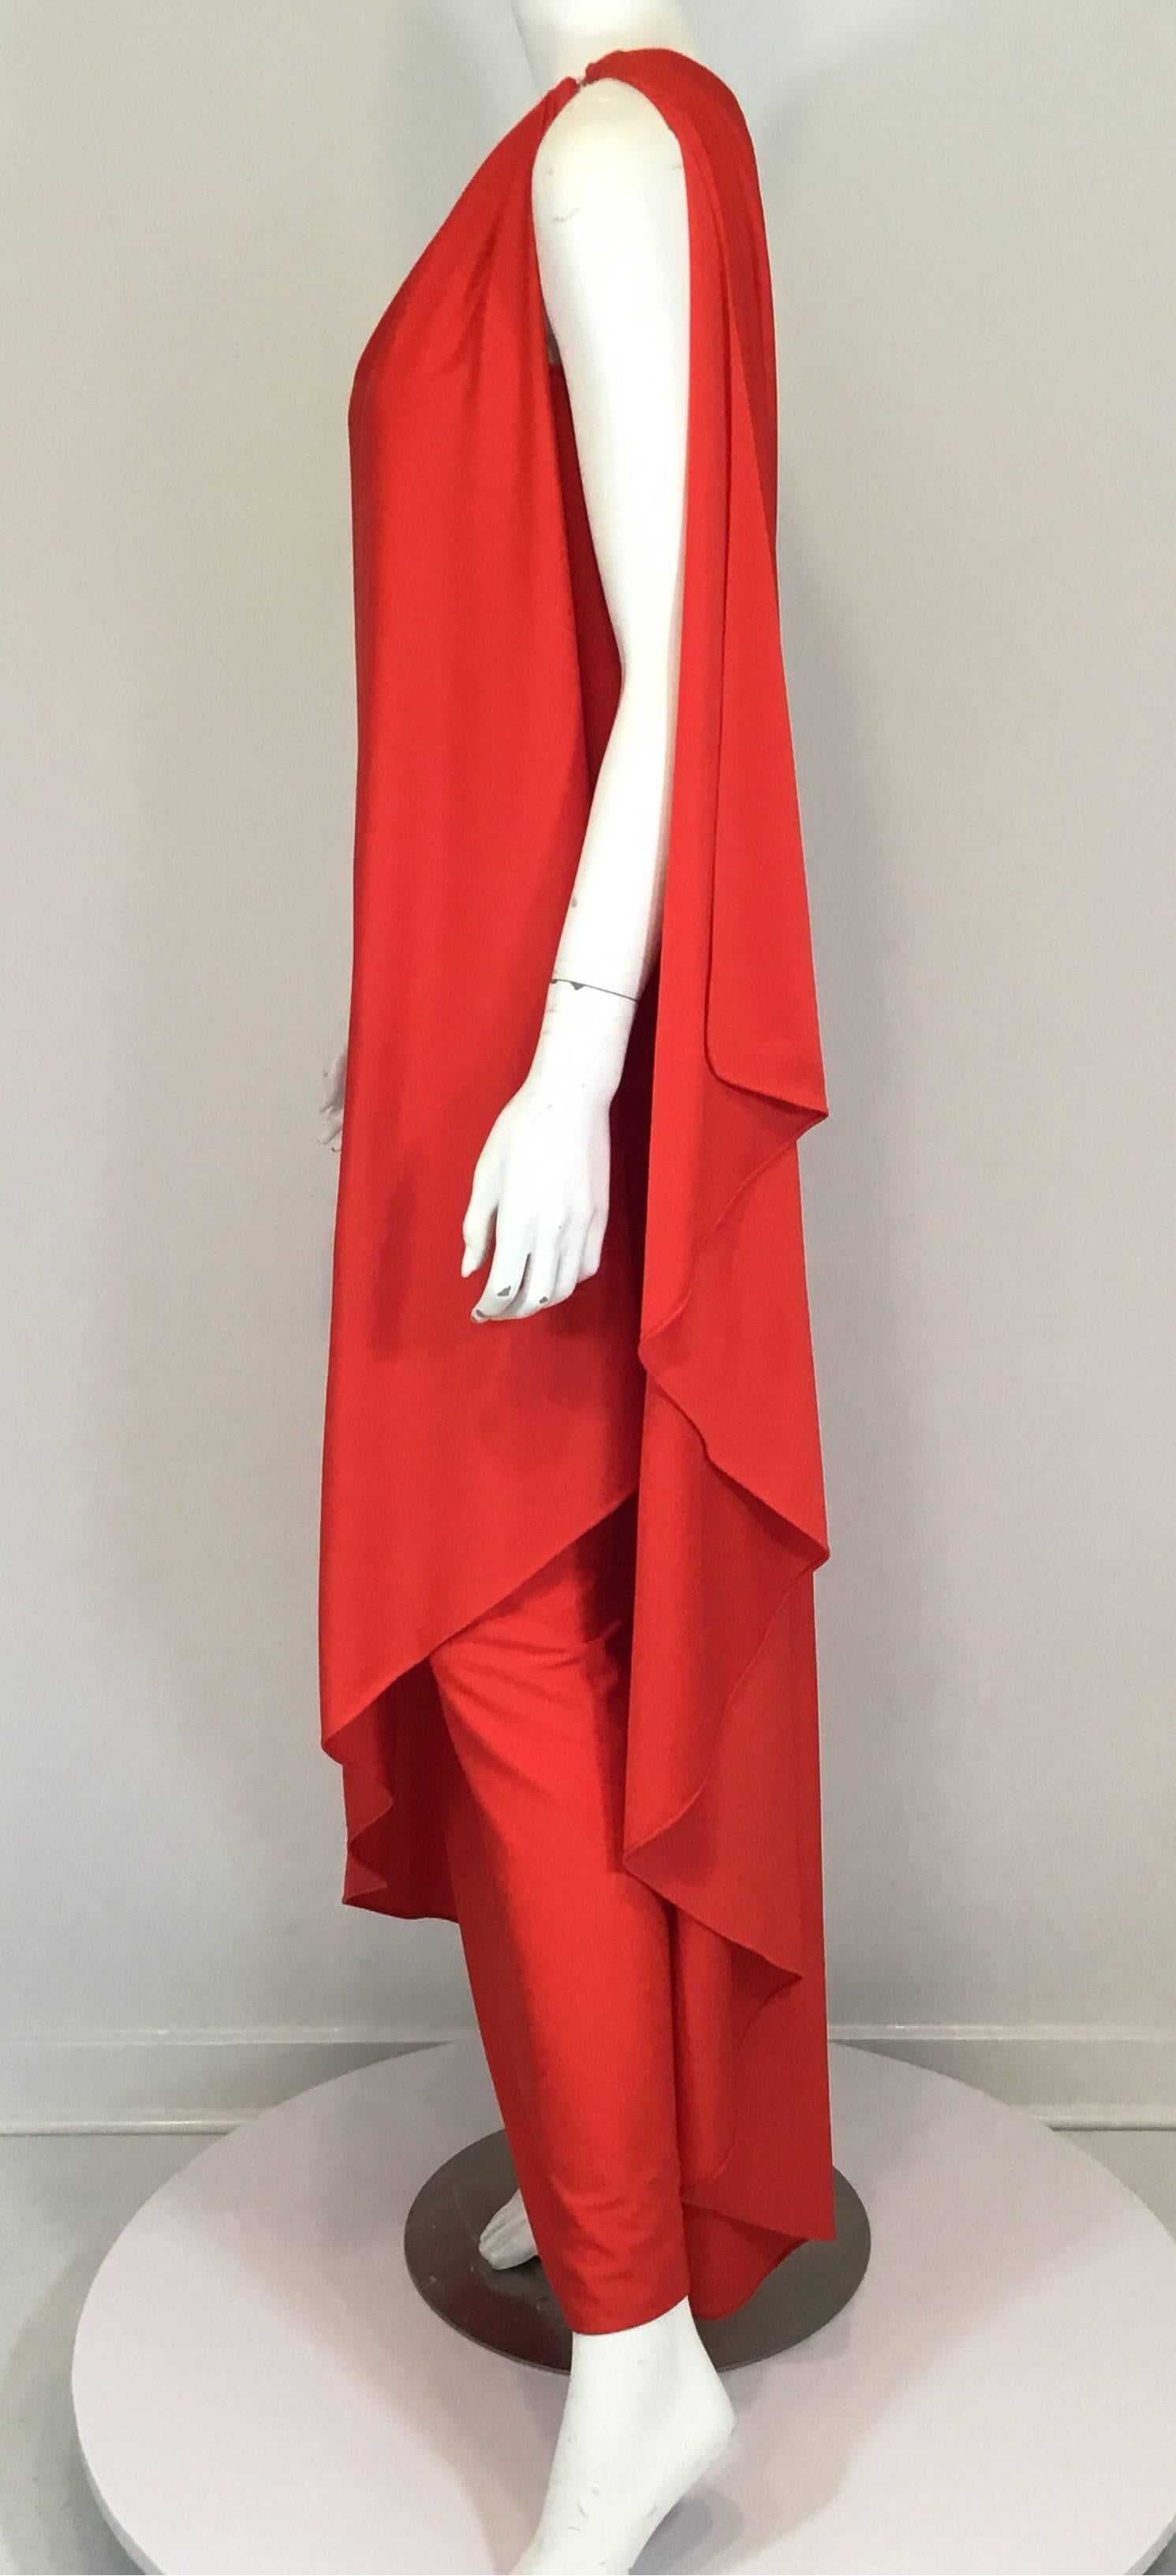 Halston IV 1970s one shoulder gown in a red-orange jersey fabric. Features a hook-and-eye closure at the shoulder ins a side slit at the bottom side. Very attractive on. Fabric is a synthetic. Travels well.

Measurements: bust 34'', waist 38'', hips